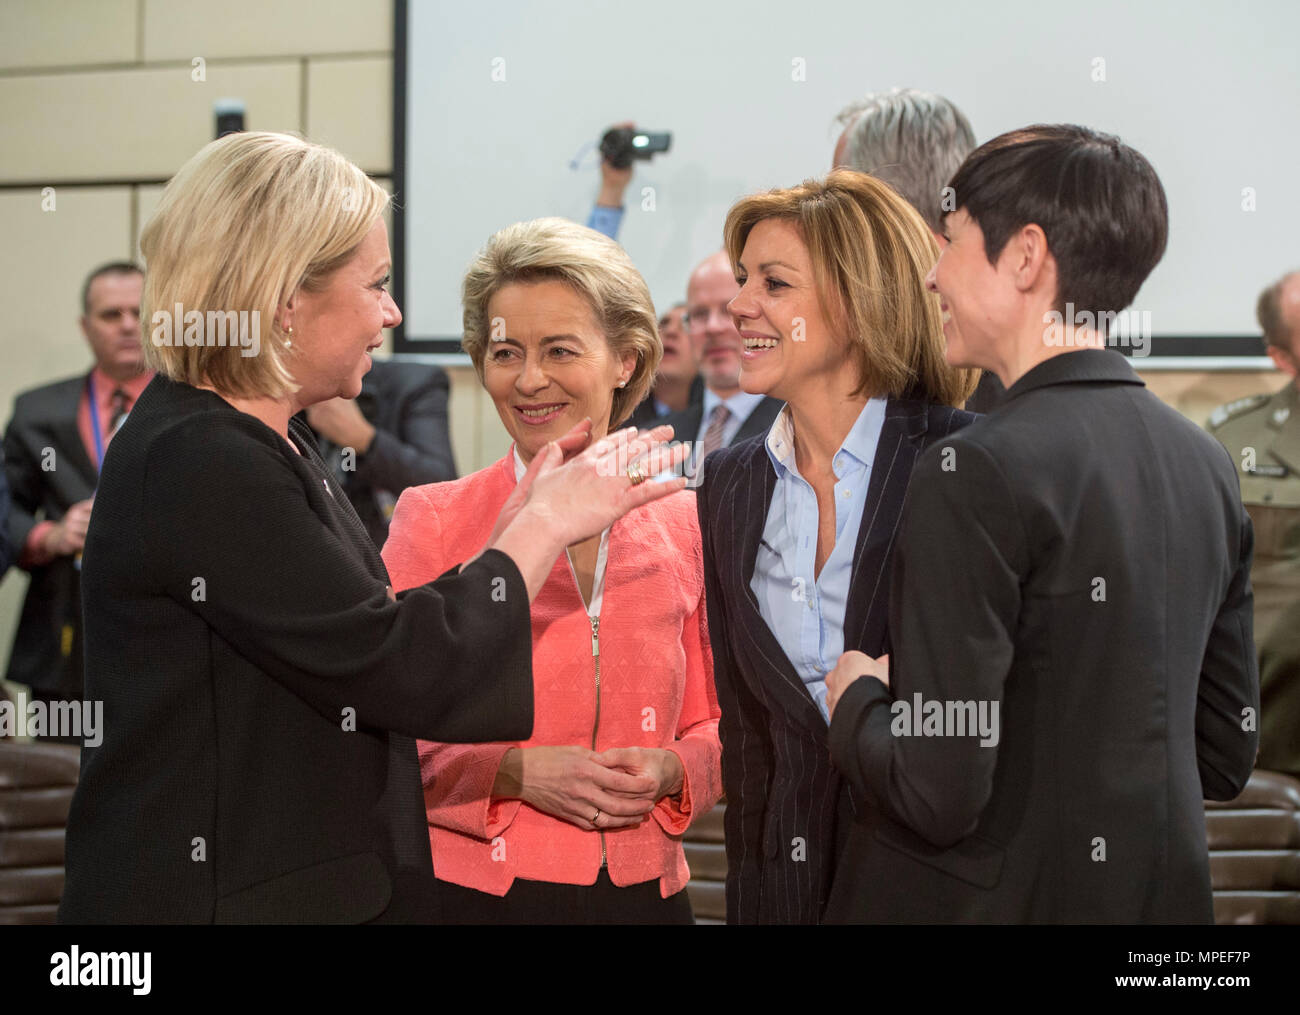 Female ministers of defense talk before a meeting of the North Atlantic Council the NATO Headquarters in Brussels, Belgium, Feb. 15, 2017. From left to right are Jeanine Hennis-Plasschaert (Netherlands), Ursula von der Leyen (Germany), Maria Dolores de Cospedal Garcia (Spain) and Ine Marie Eriksen Soreide. (DOD photo by U.S. Air Force Tech. Sgt. Brigitte N. Brantley) Stock Photo